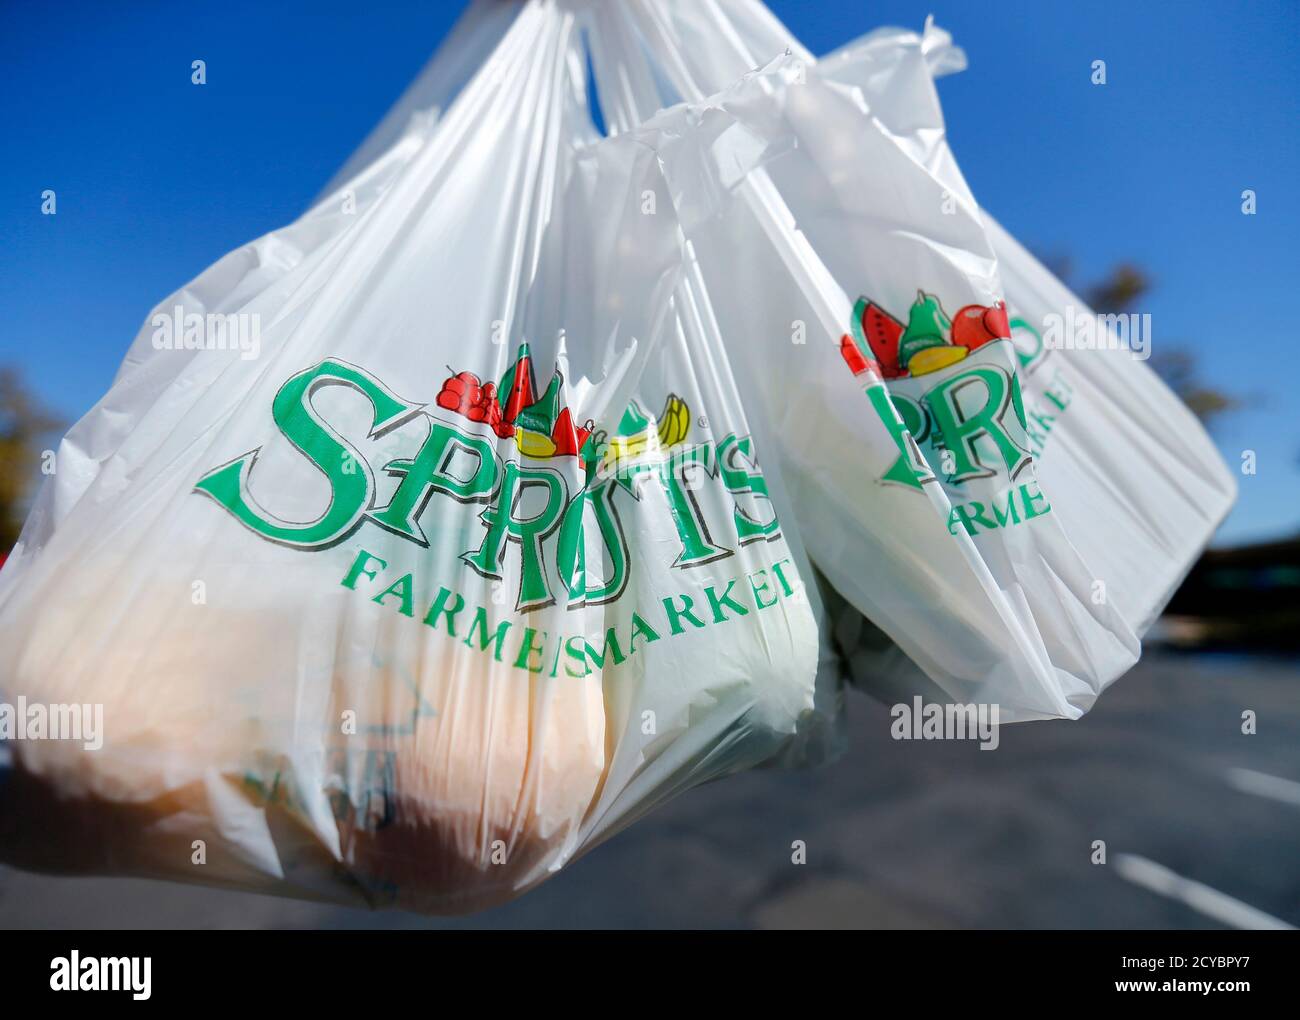 Groceries are carried in plastic bags in San Diego, California September 30, 2014. Single-use plastic bags are set to disappear from California grocery stores over the next two years under a first-in-the-nation state law signed on Tuesday by Democratic Governor Jerry Brown, despite opposition from bag manufacturers.      REUTERS/Mike Blake (UNITED STATES - Tags: ENVIRONMENT BUSINESS) Stock Photo